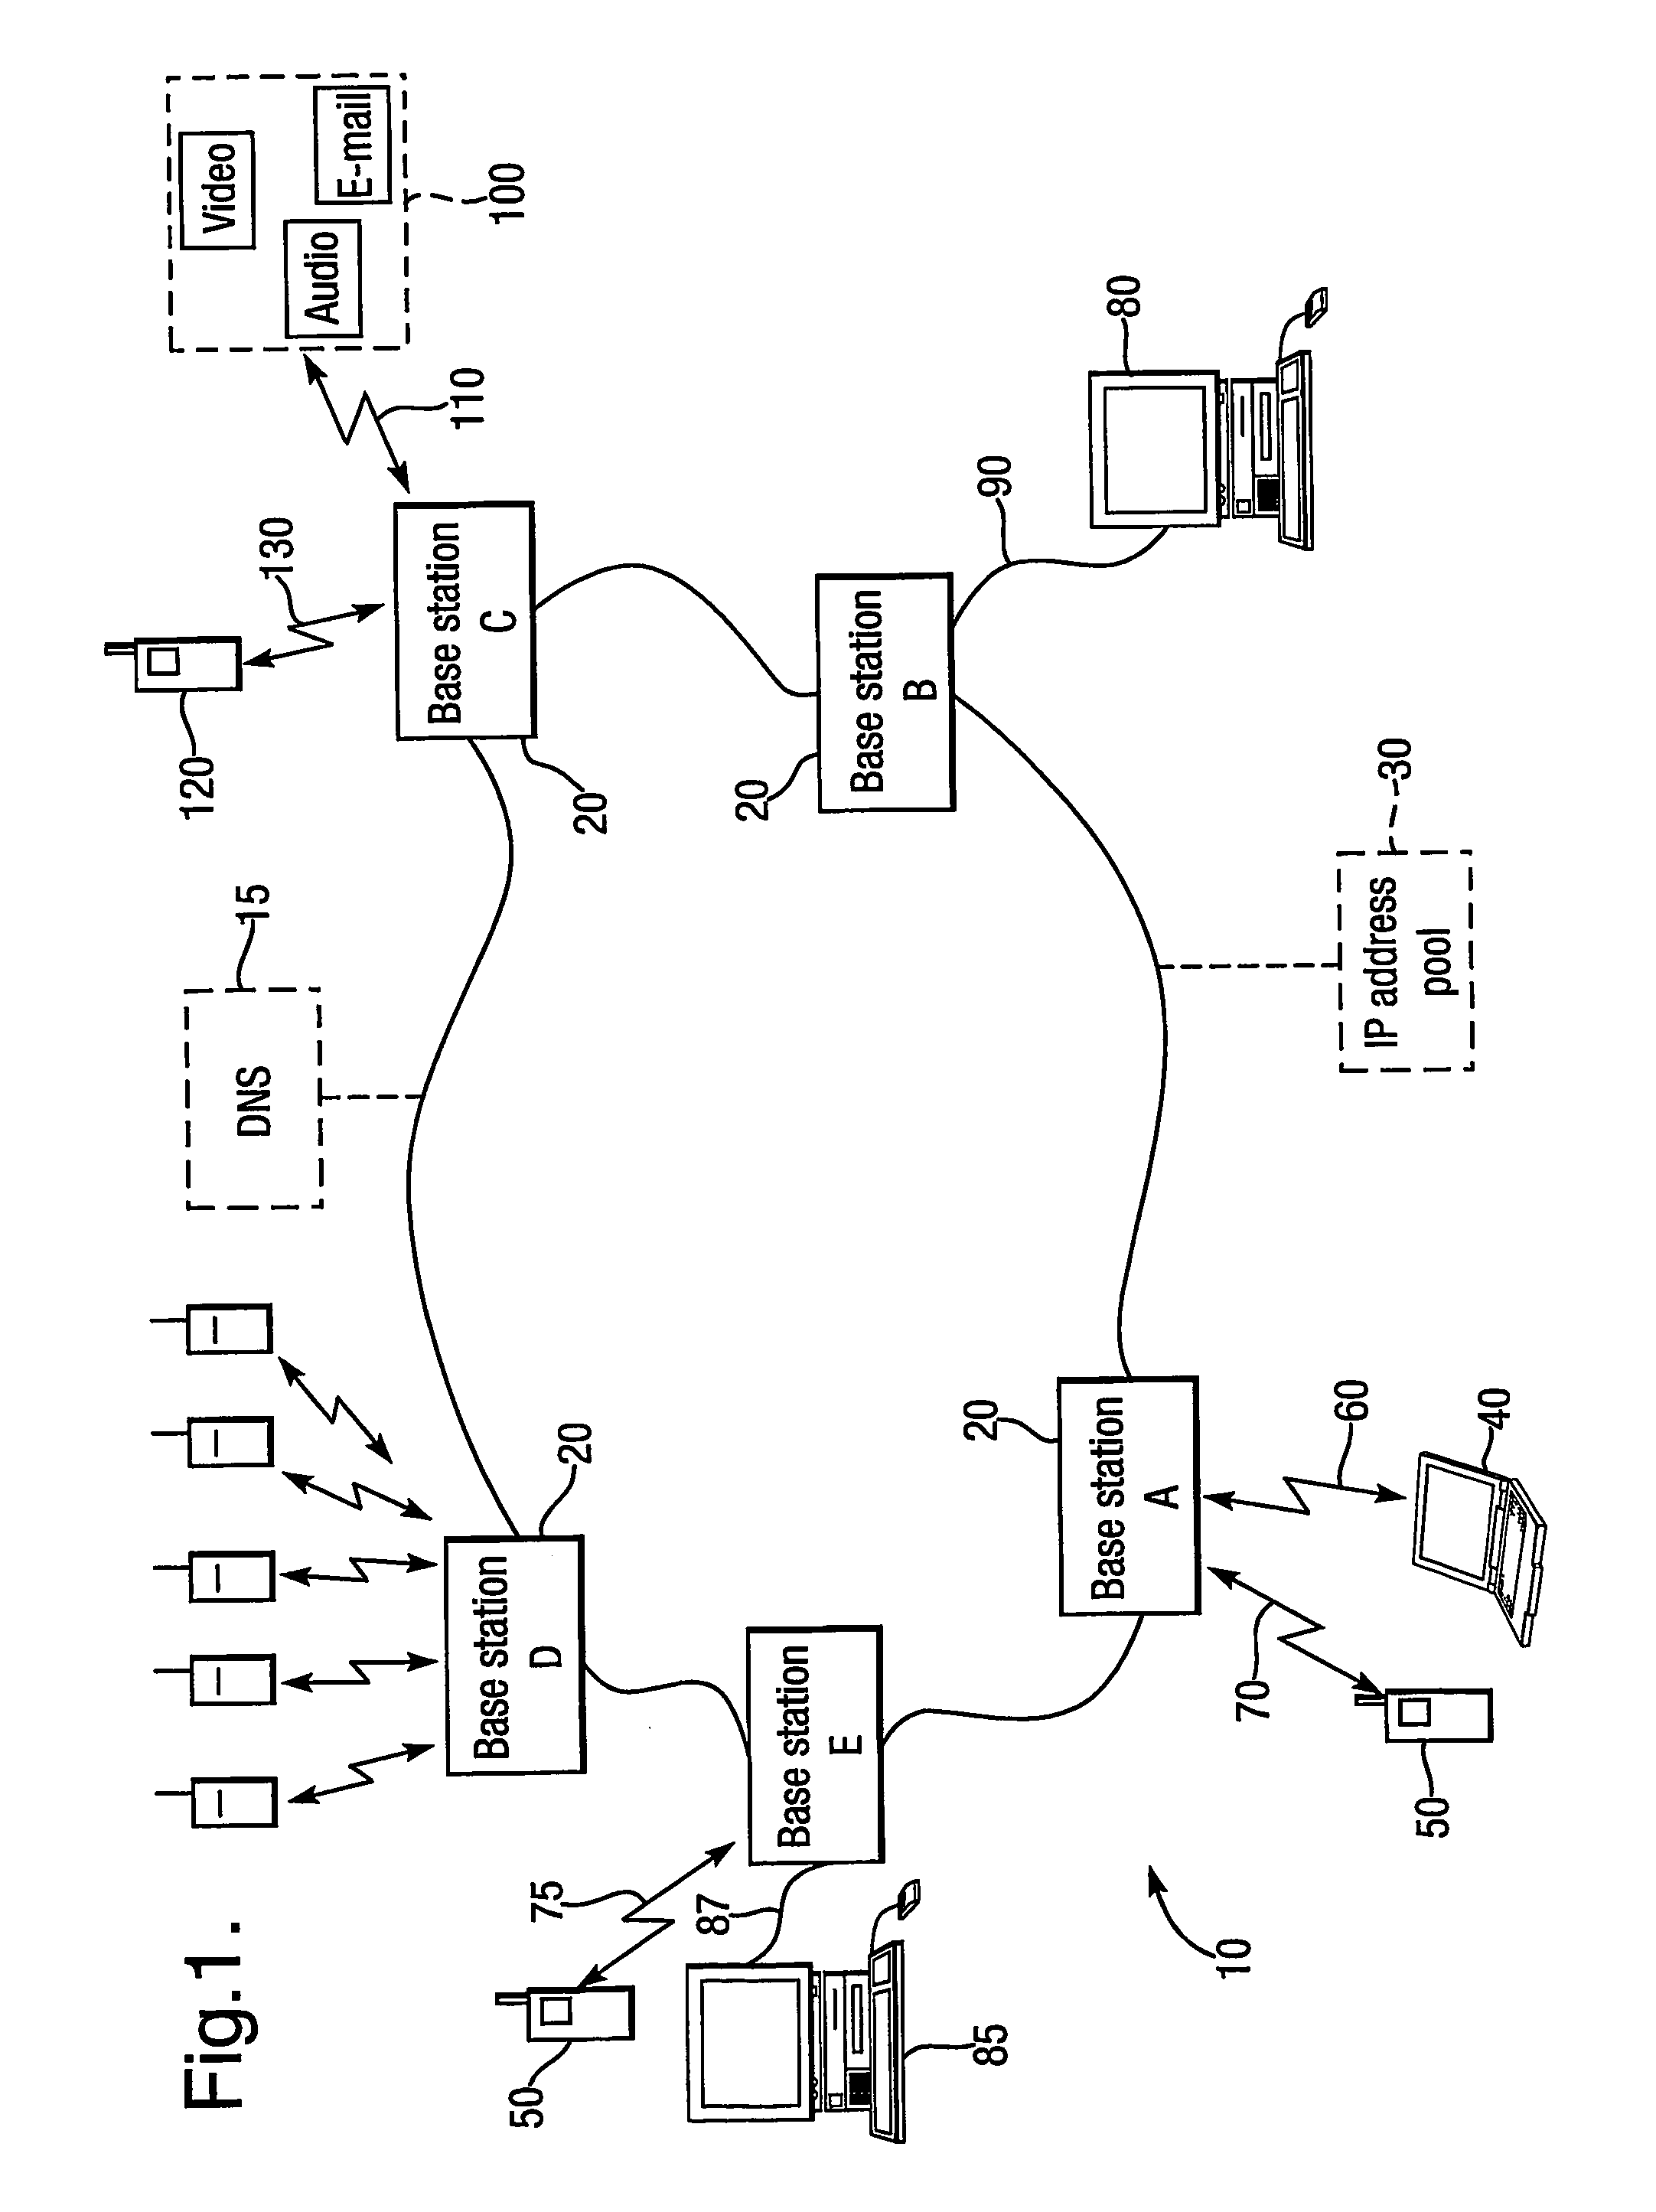 Method of data transfer in mobile and fixed telecommunications systems